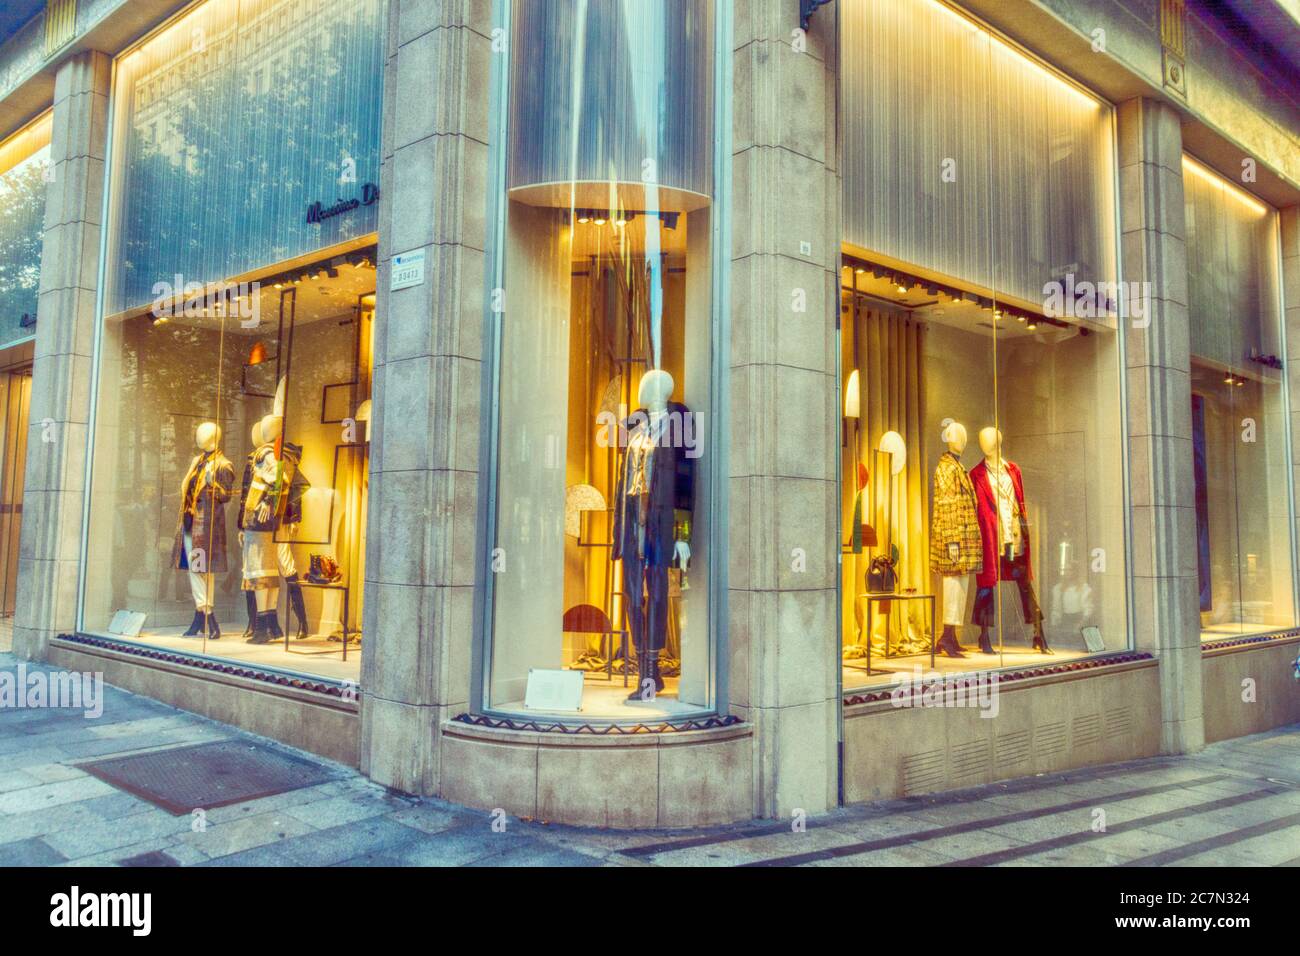 Digitized high-end fashion storefronts line a street in Barcelona, Spain. Stock Photo